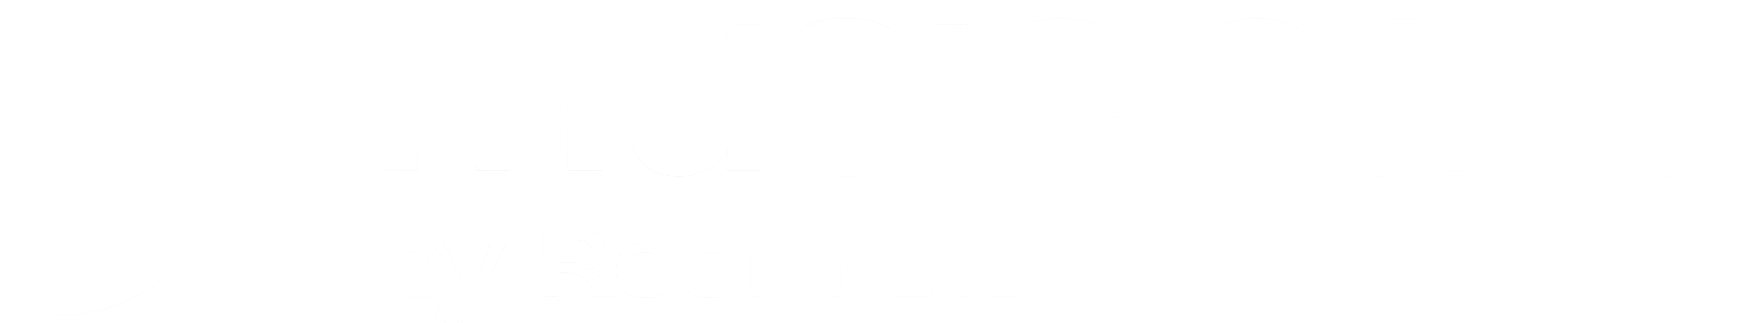 MUSIC CARE by Room 217